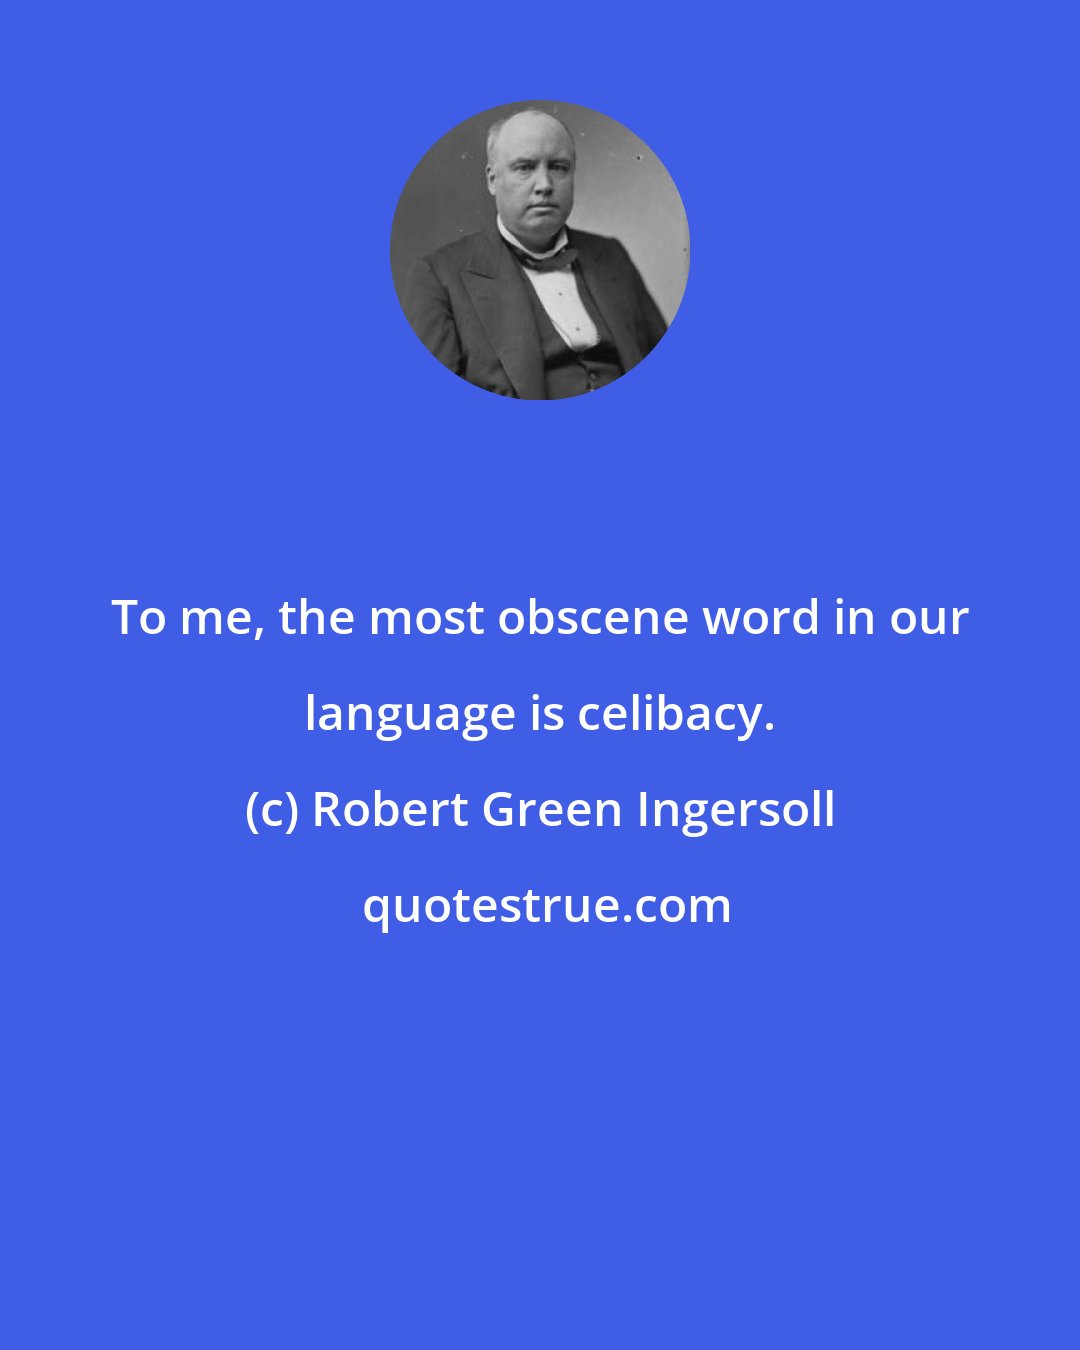 Robert Green Ingersoll: To me, the most obscene word in our language is celibacy.